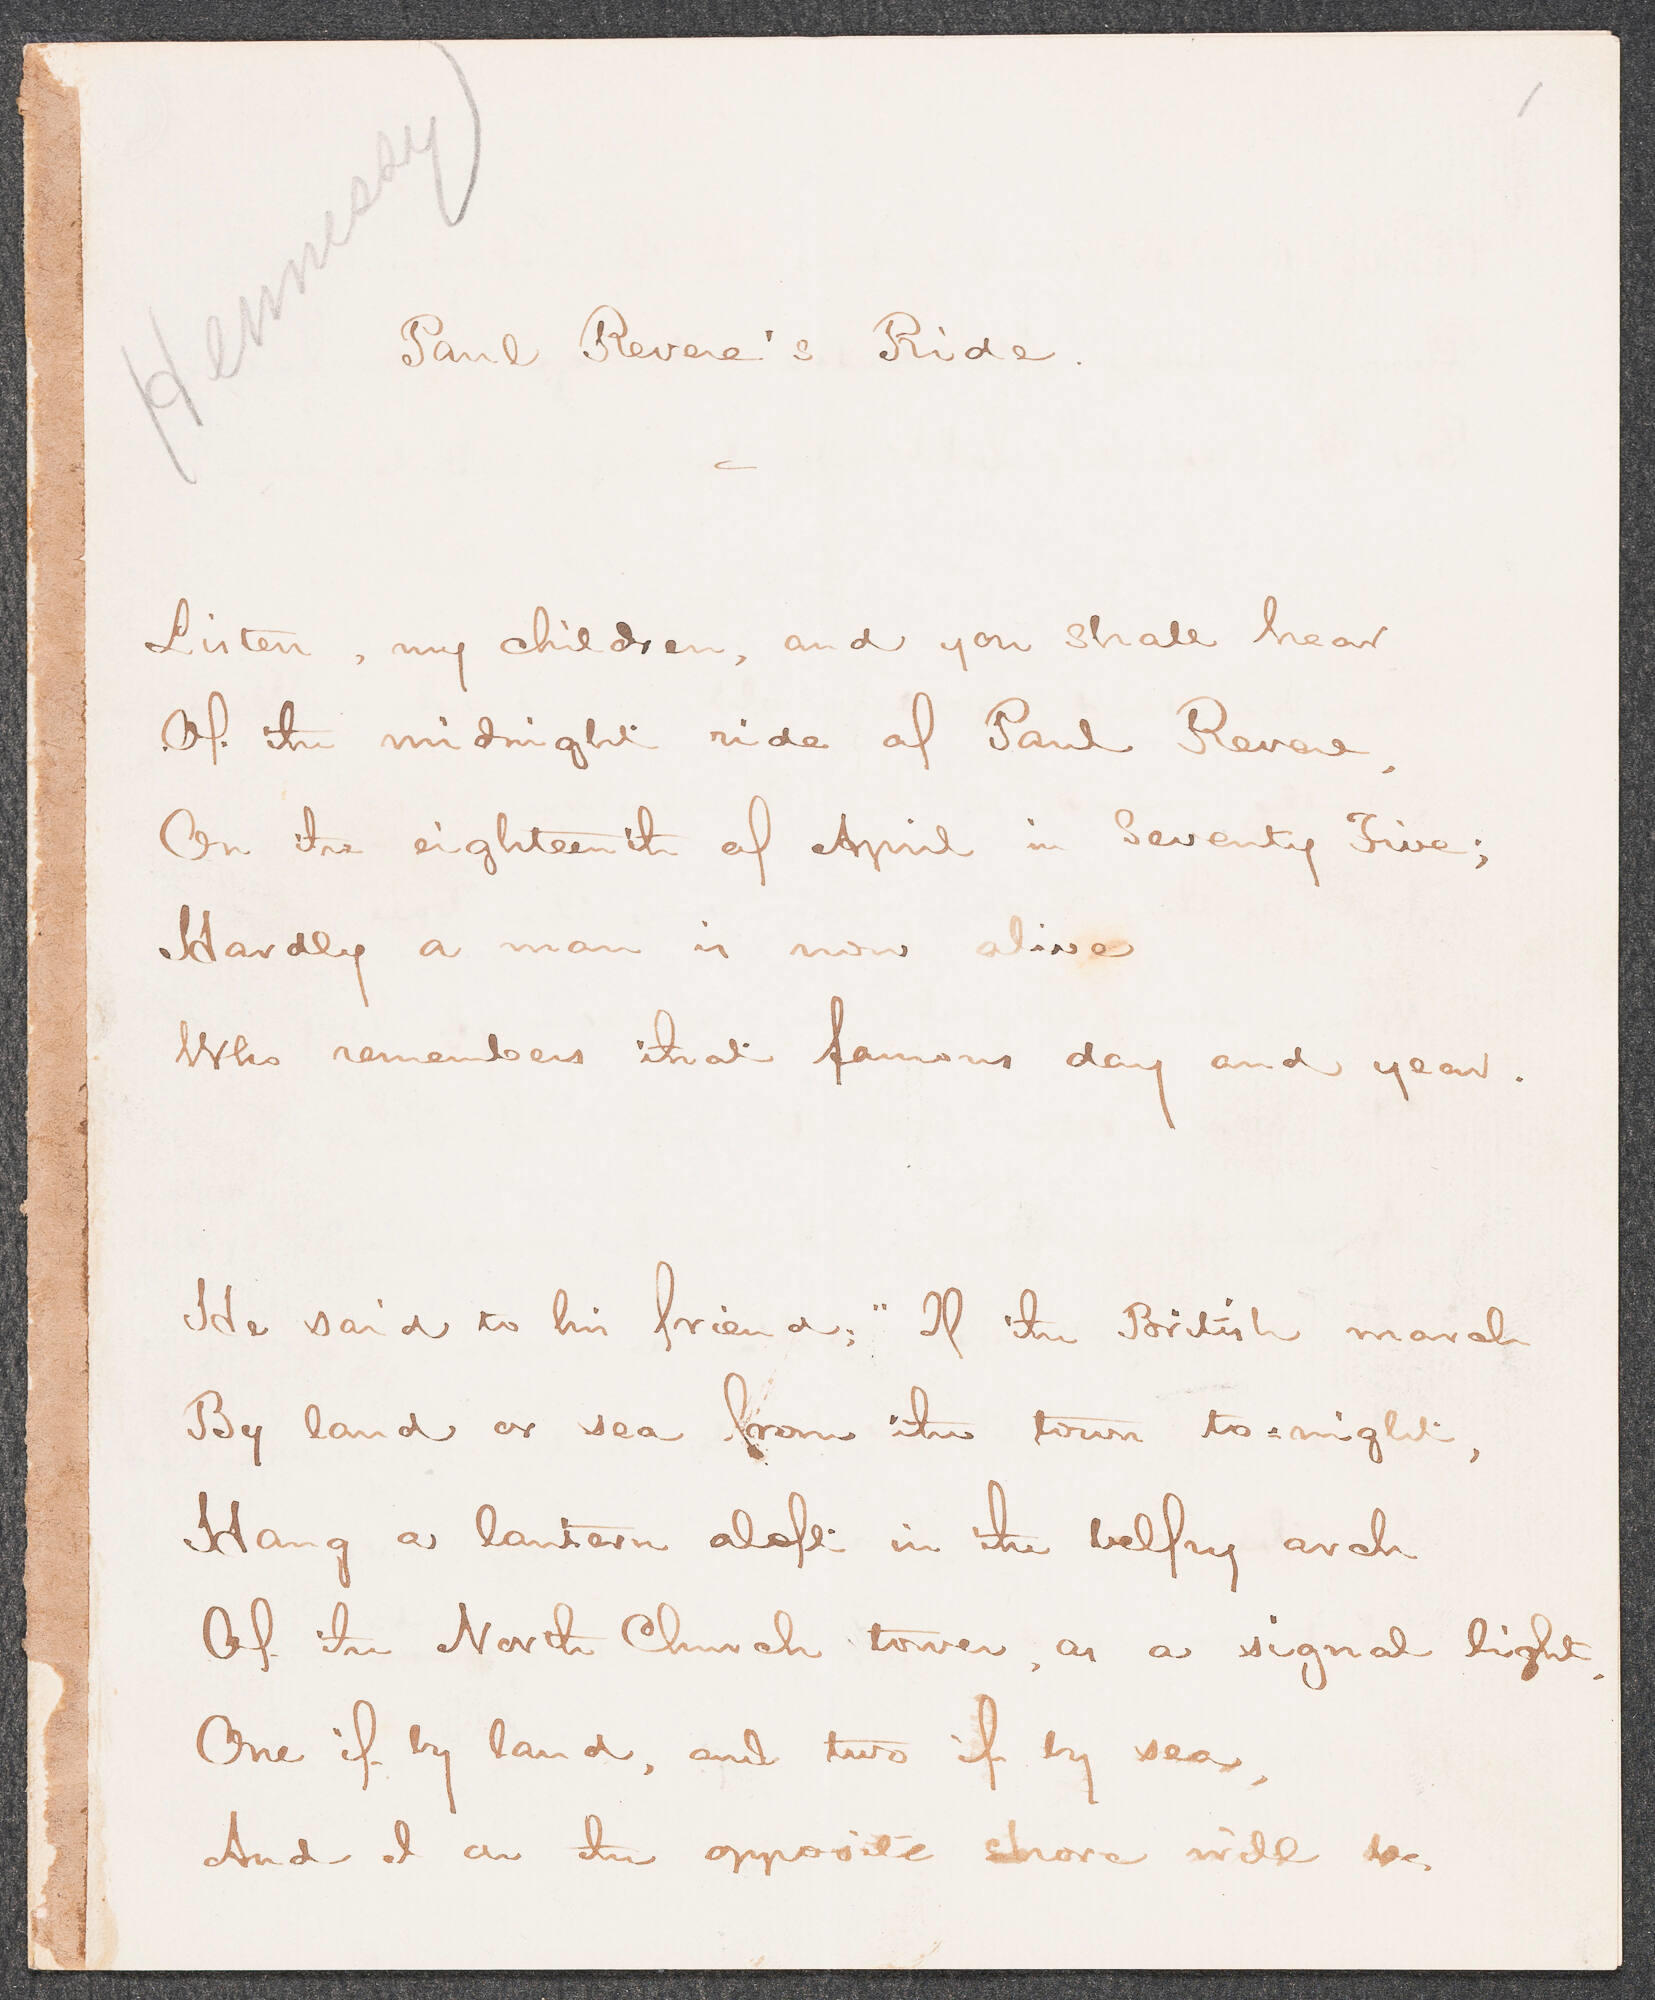 The first page of Gardner's manuscript of Longfellow’s poem “Paul Revere’s Ride” with Hennessy written in pencil.